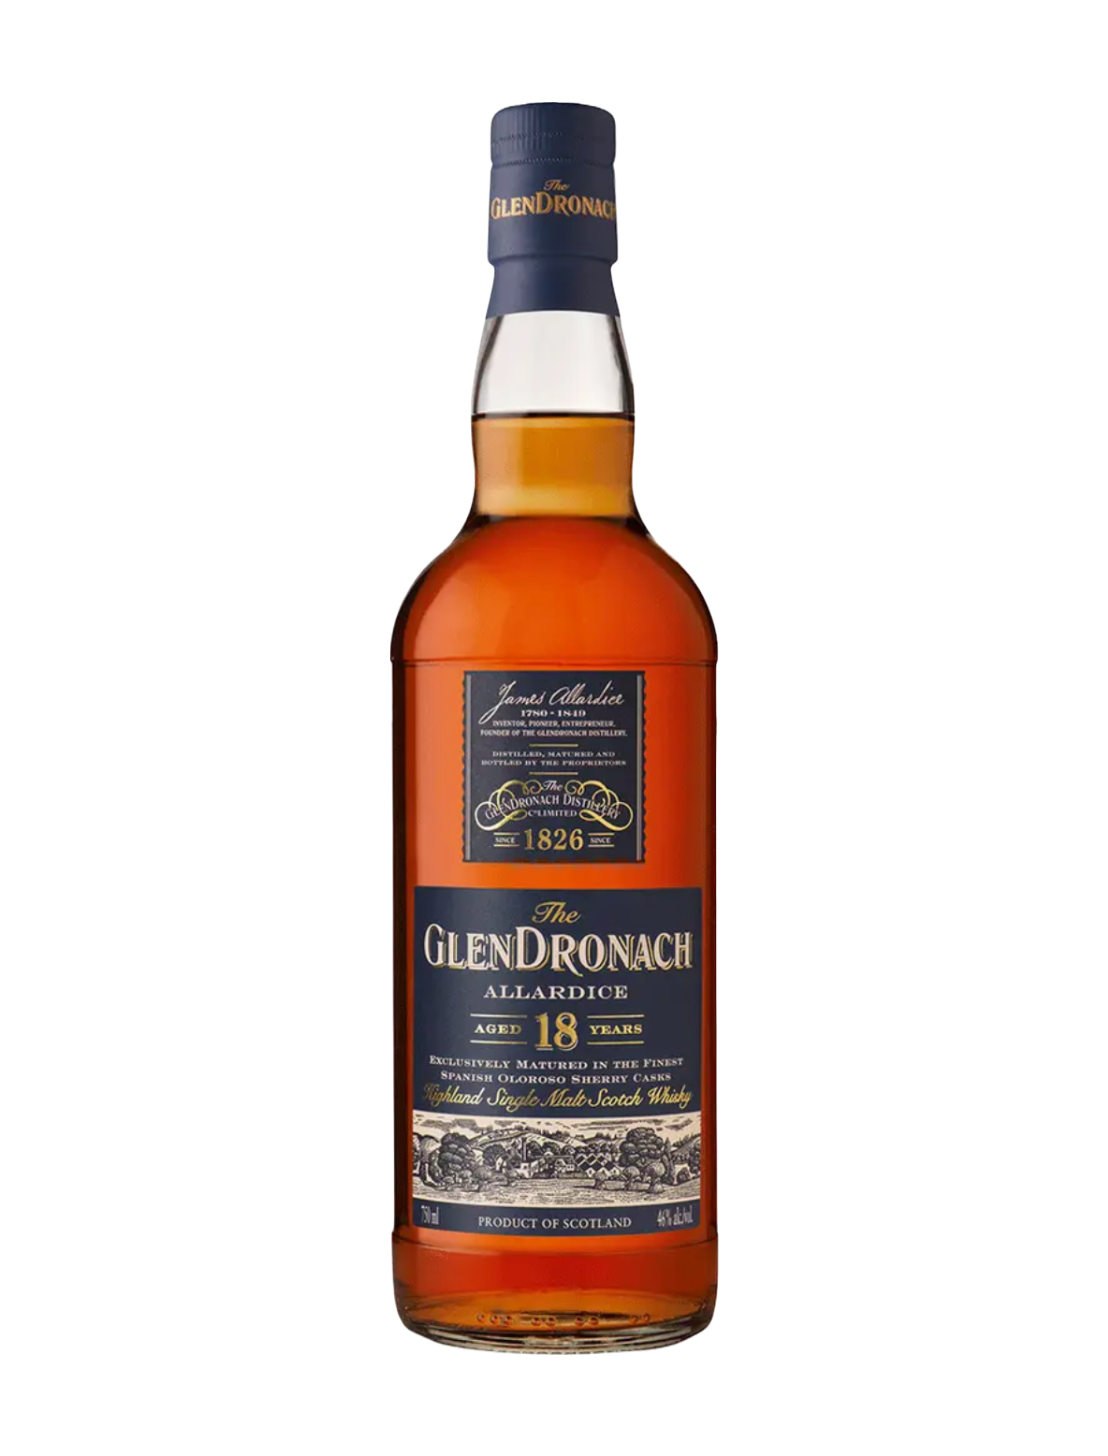 An elegant bottle of Glendronach 18 Year Single Malt Scotch Whisky in front of a plain white background